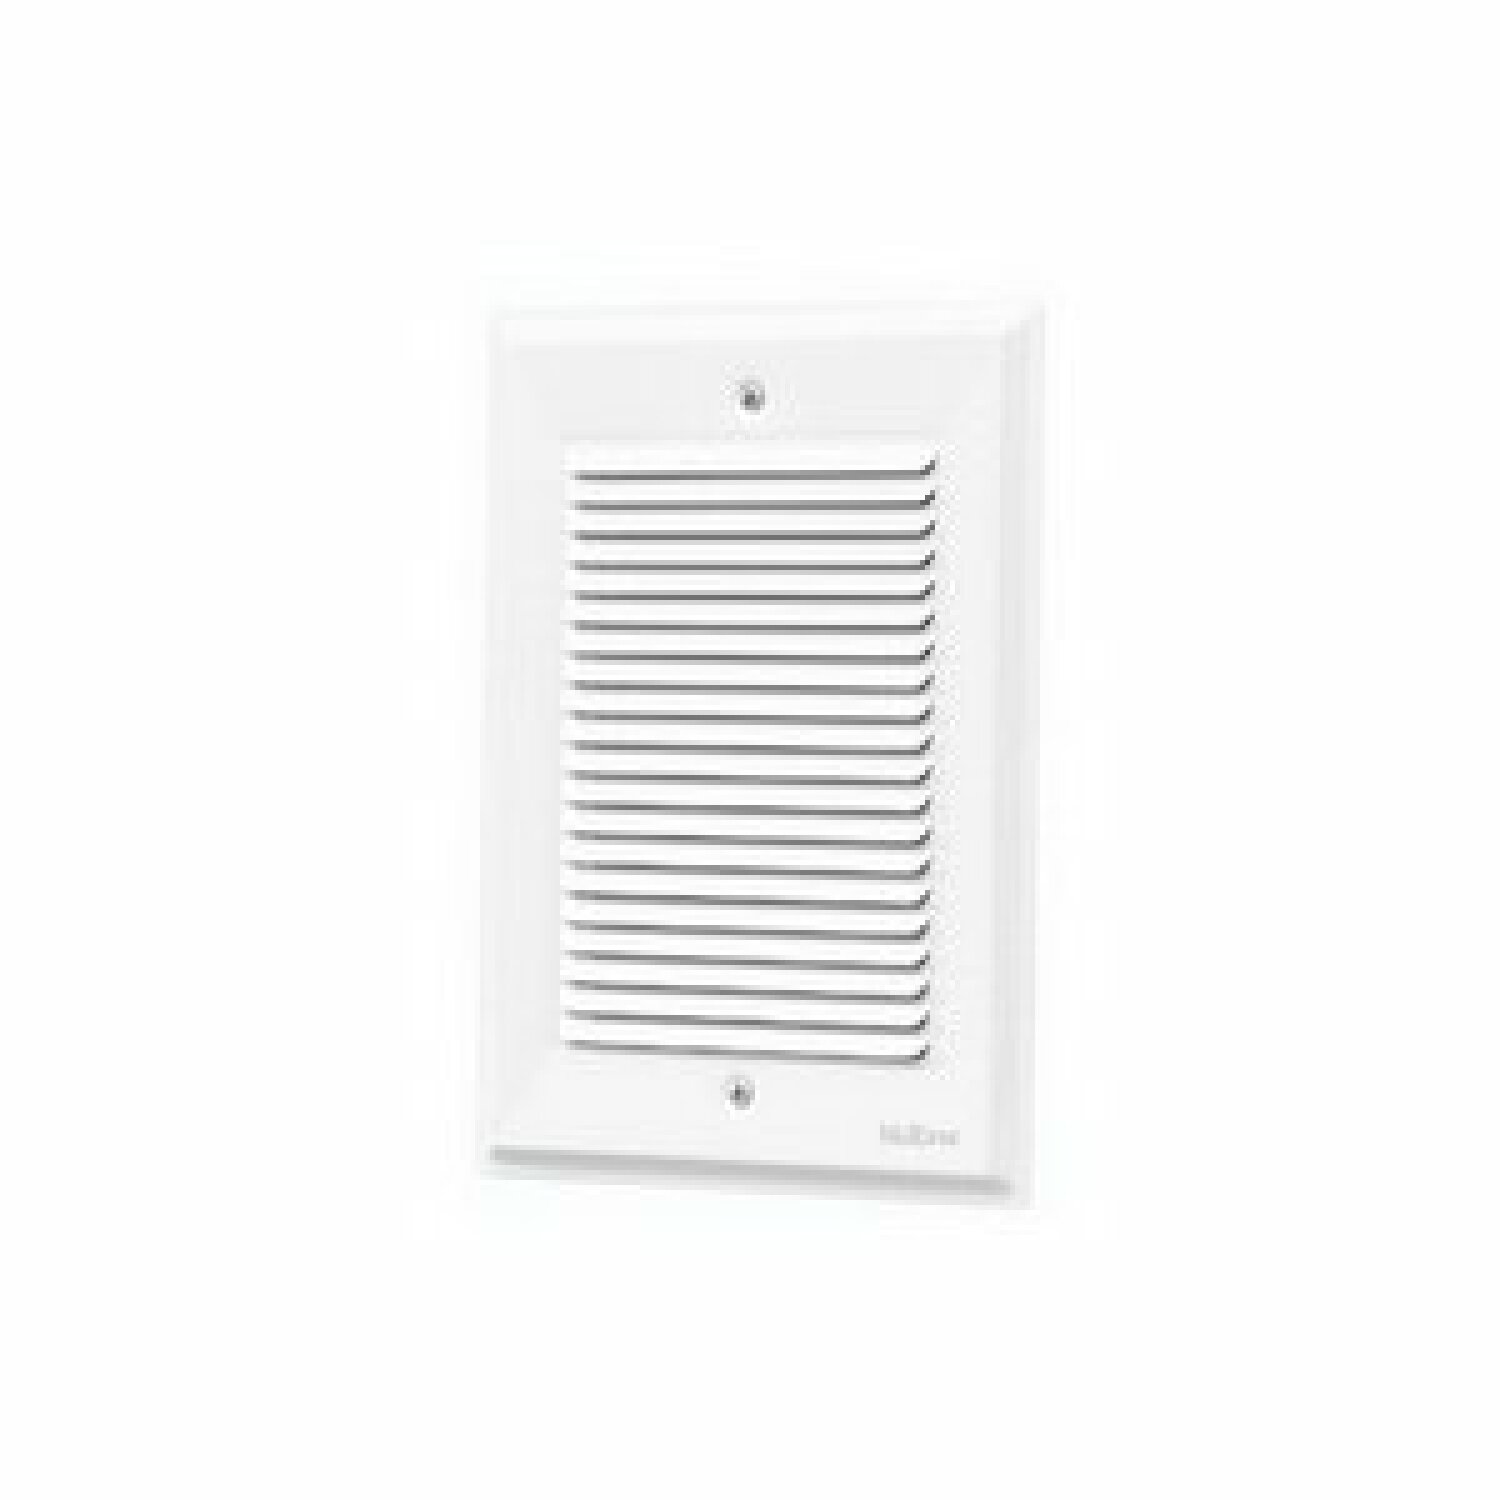 <a href="https://amzn.to/2RRgJWg" target="_blank" rel="noopener nofollow">Recessed door chime</a>